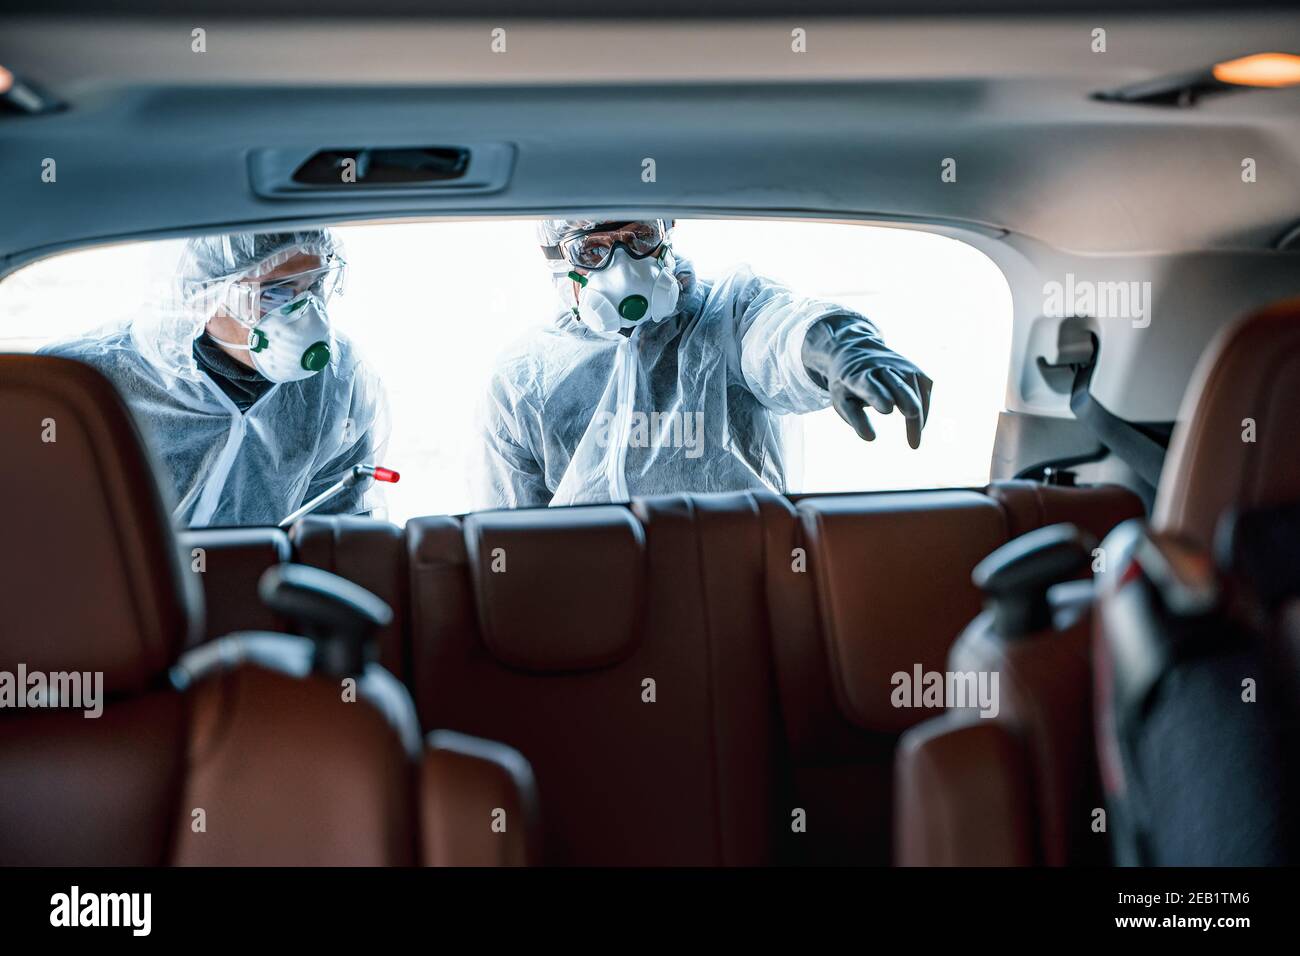 Disinfectant worker in protective masks and suits making disinfection of car seats Stock Photo